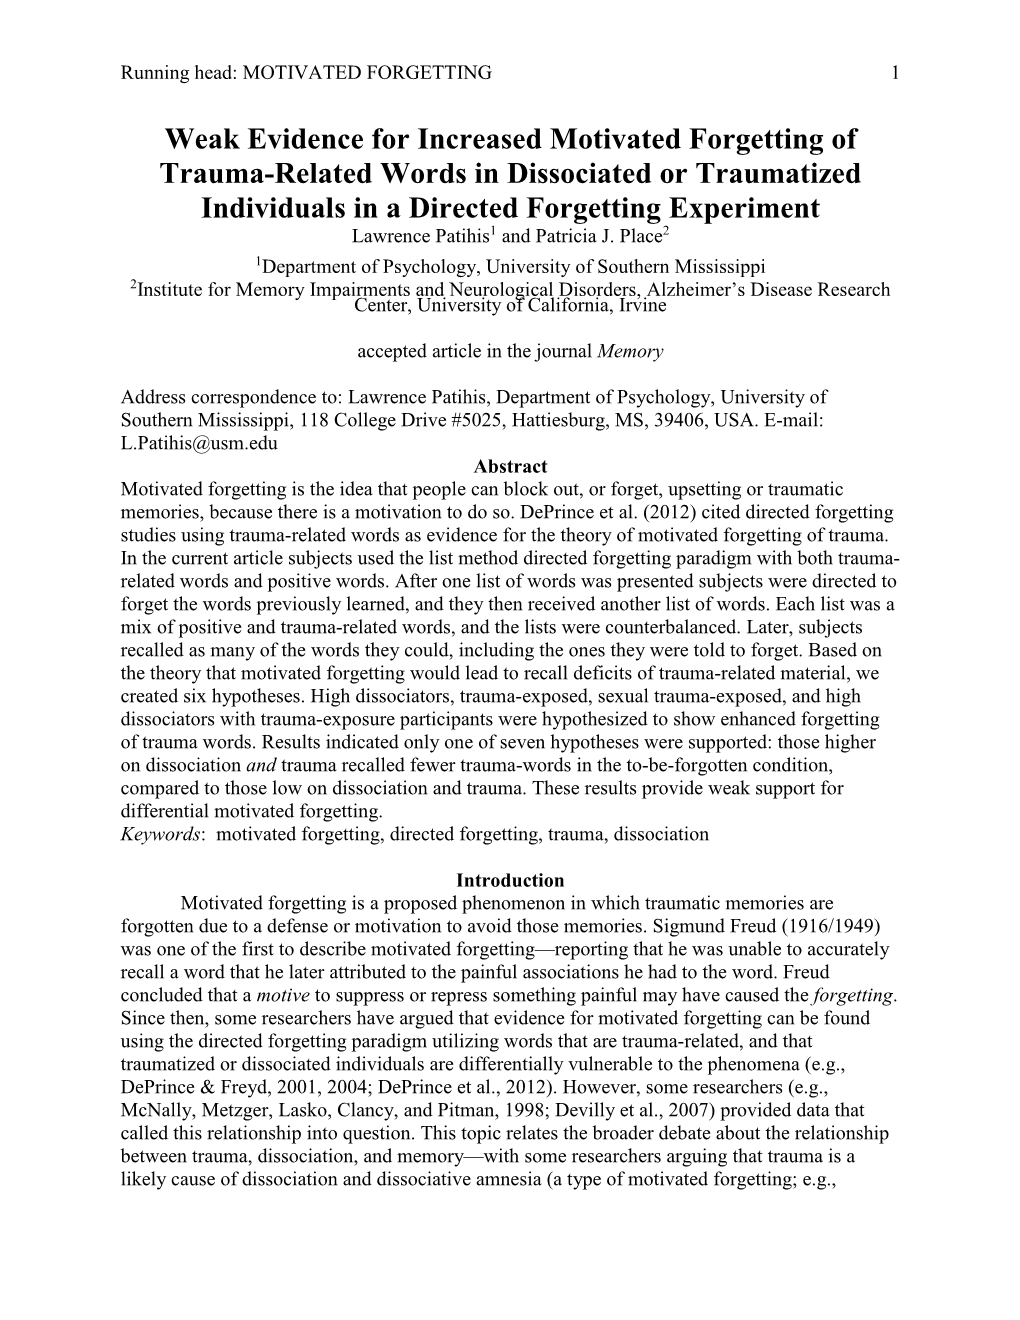 Weak Evidence for Increased Motivated Forgetting of Trauma-Related Words in Dissociated Or Traumatized Individuals in a Directed Forgetting Experiment